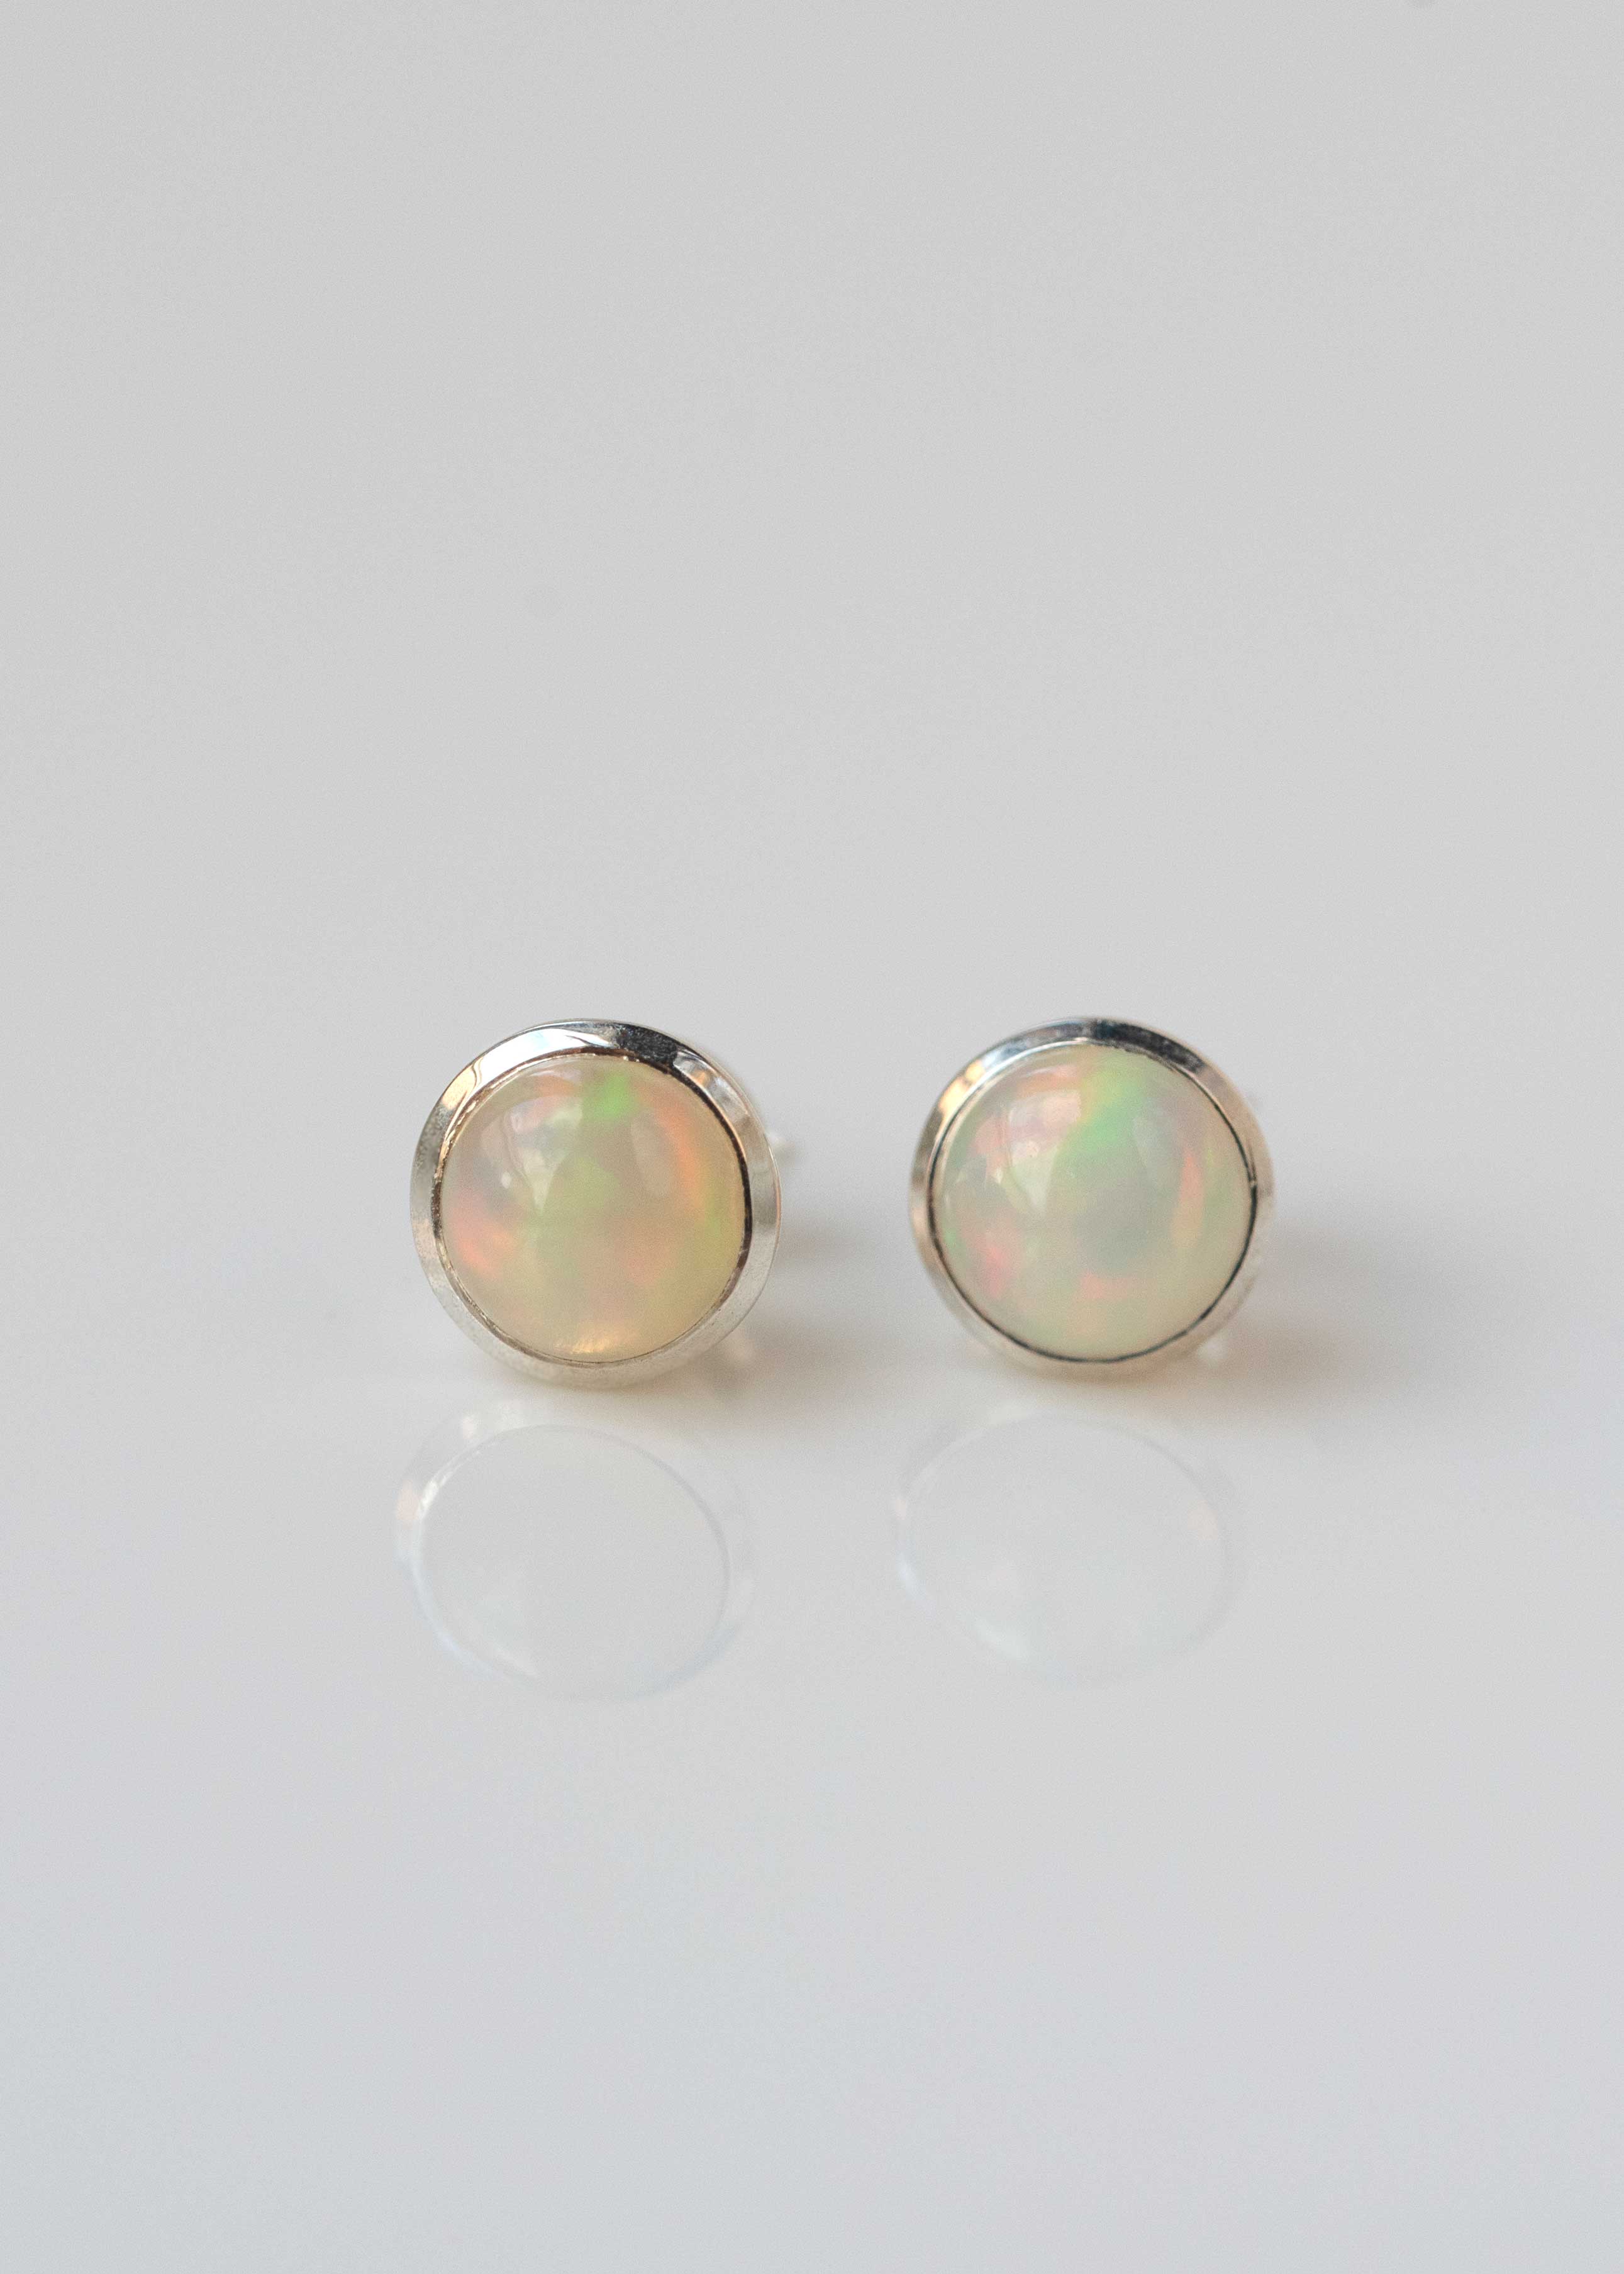 Genuine Real Opal Studs in Sterling Silver 925 October Birthstone Birthday Gifts for Women 